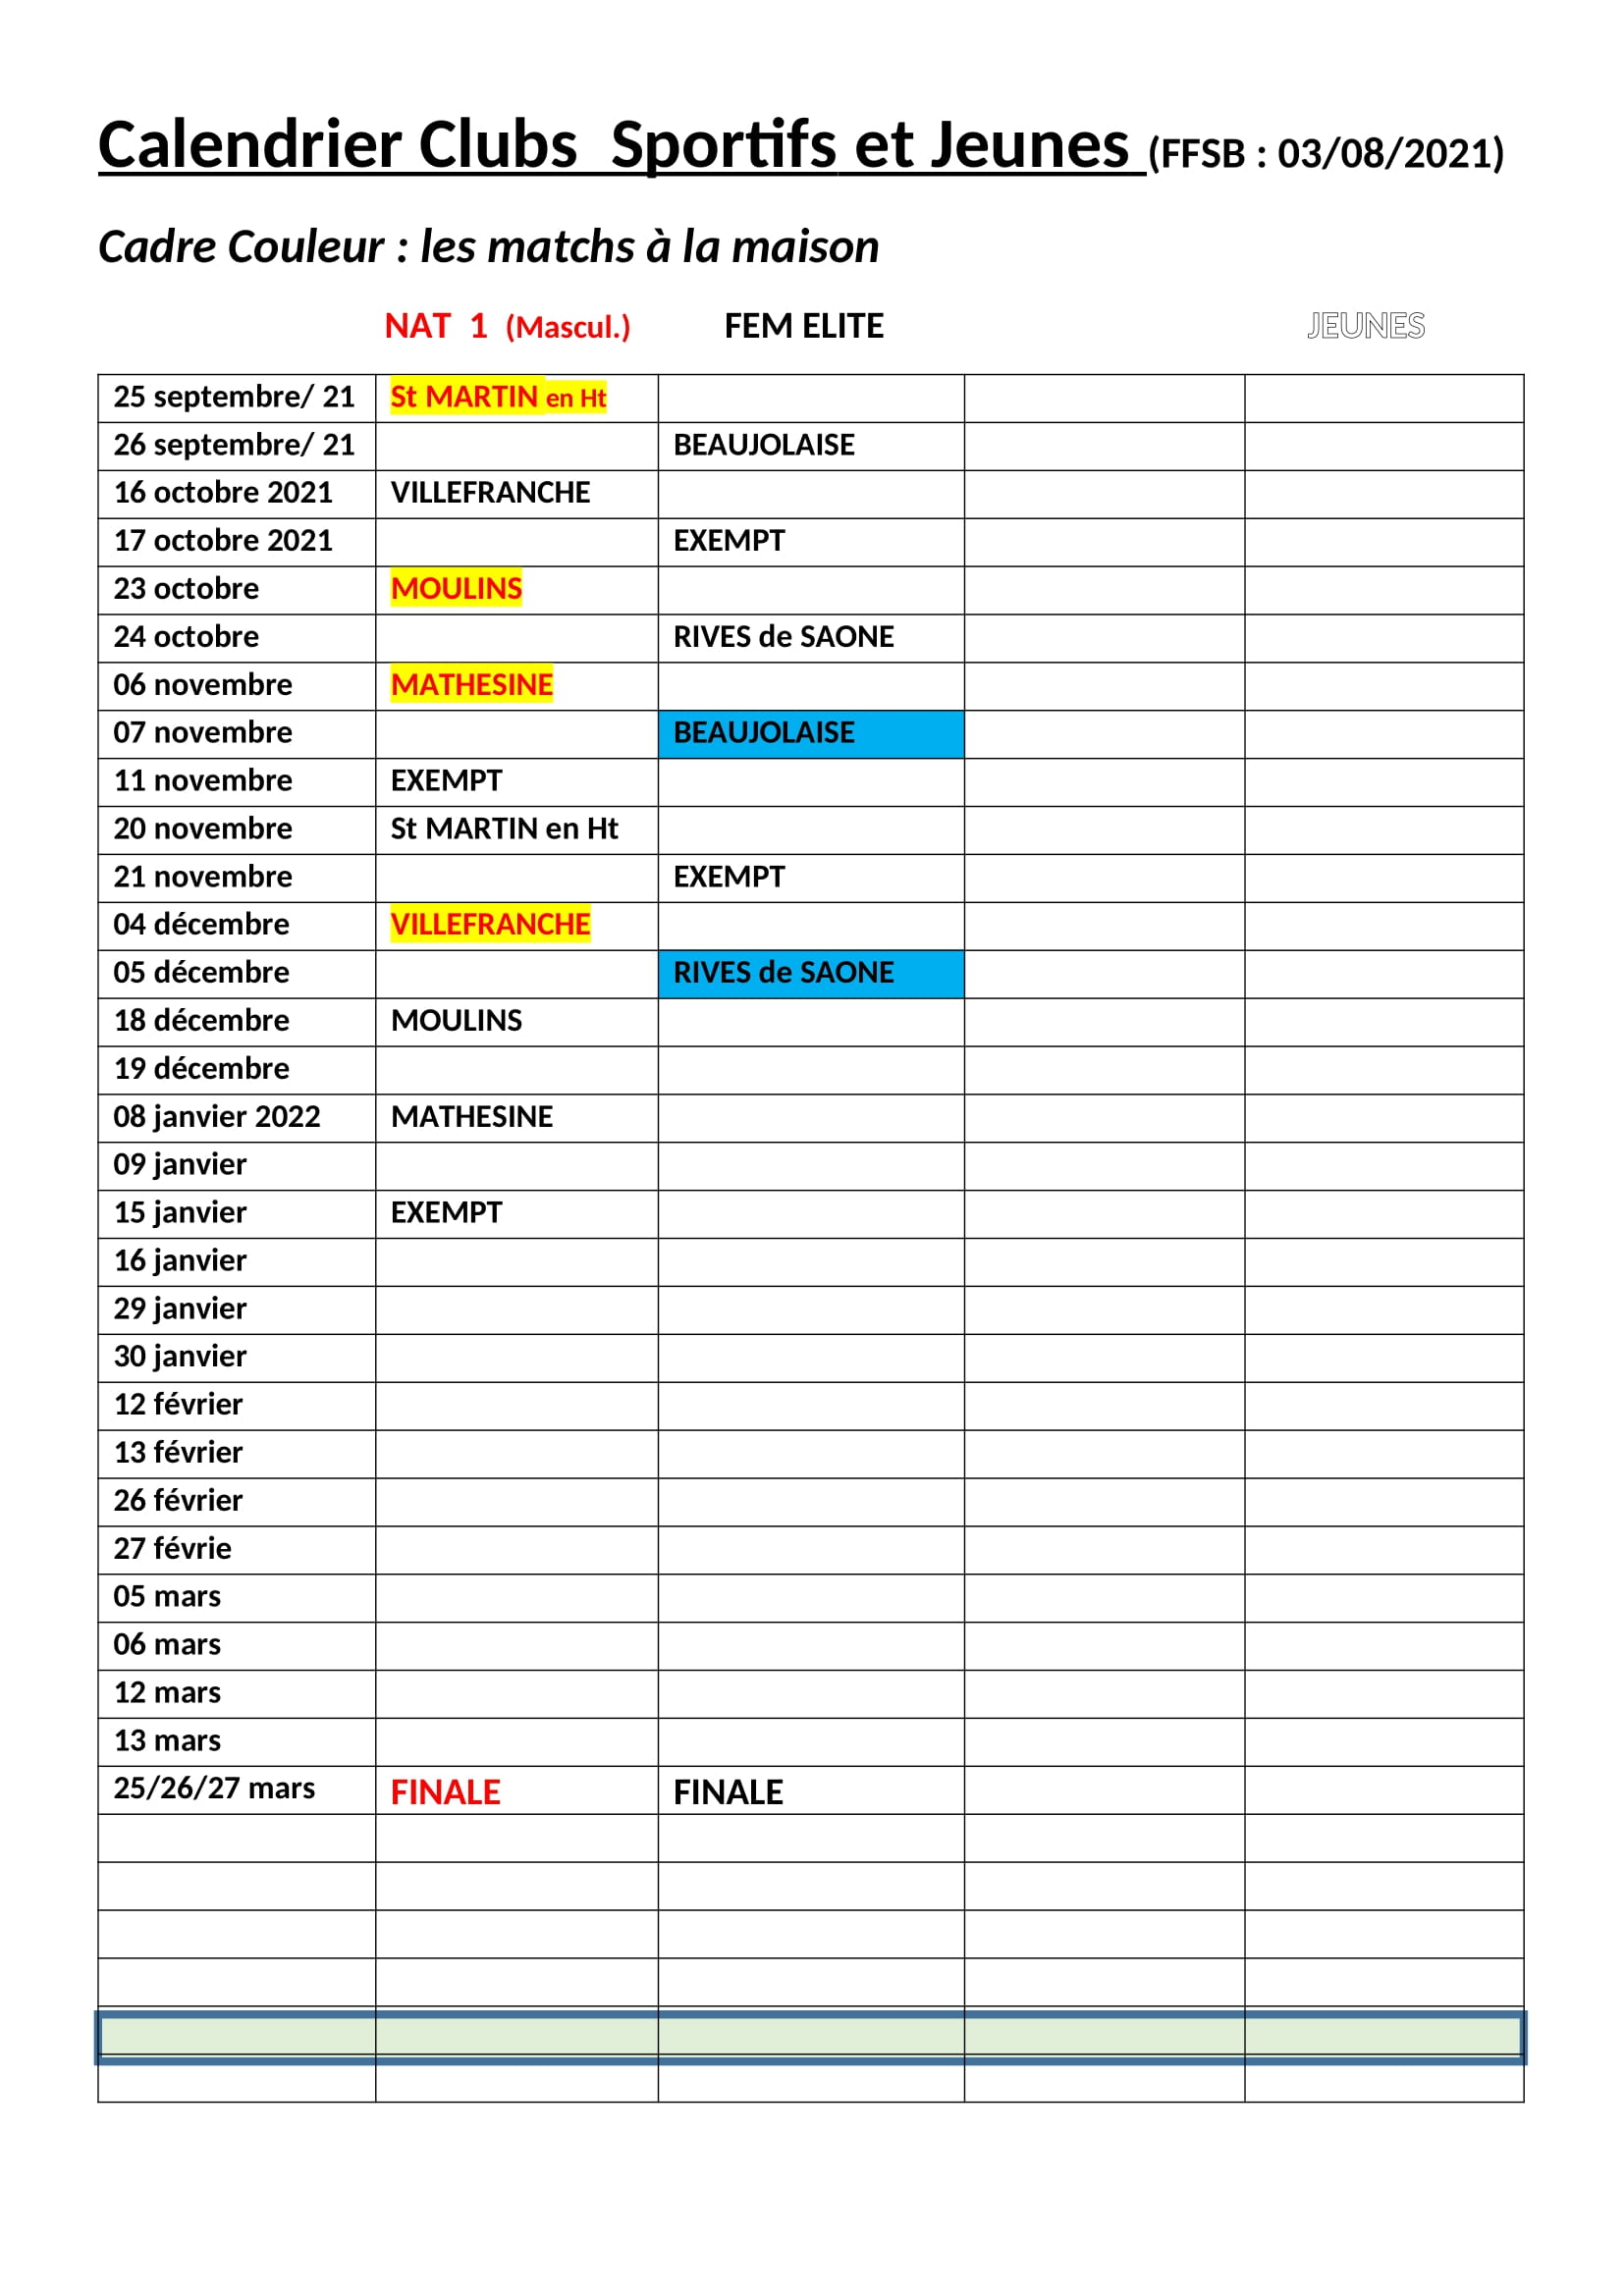 Clubs Sportifs Calendrier Rencontres 2018 2019-page-001